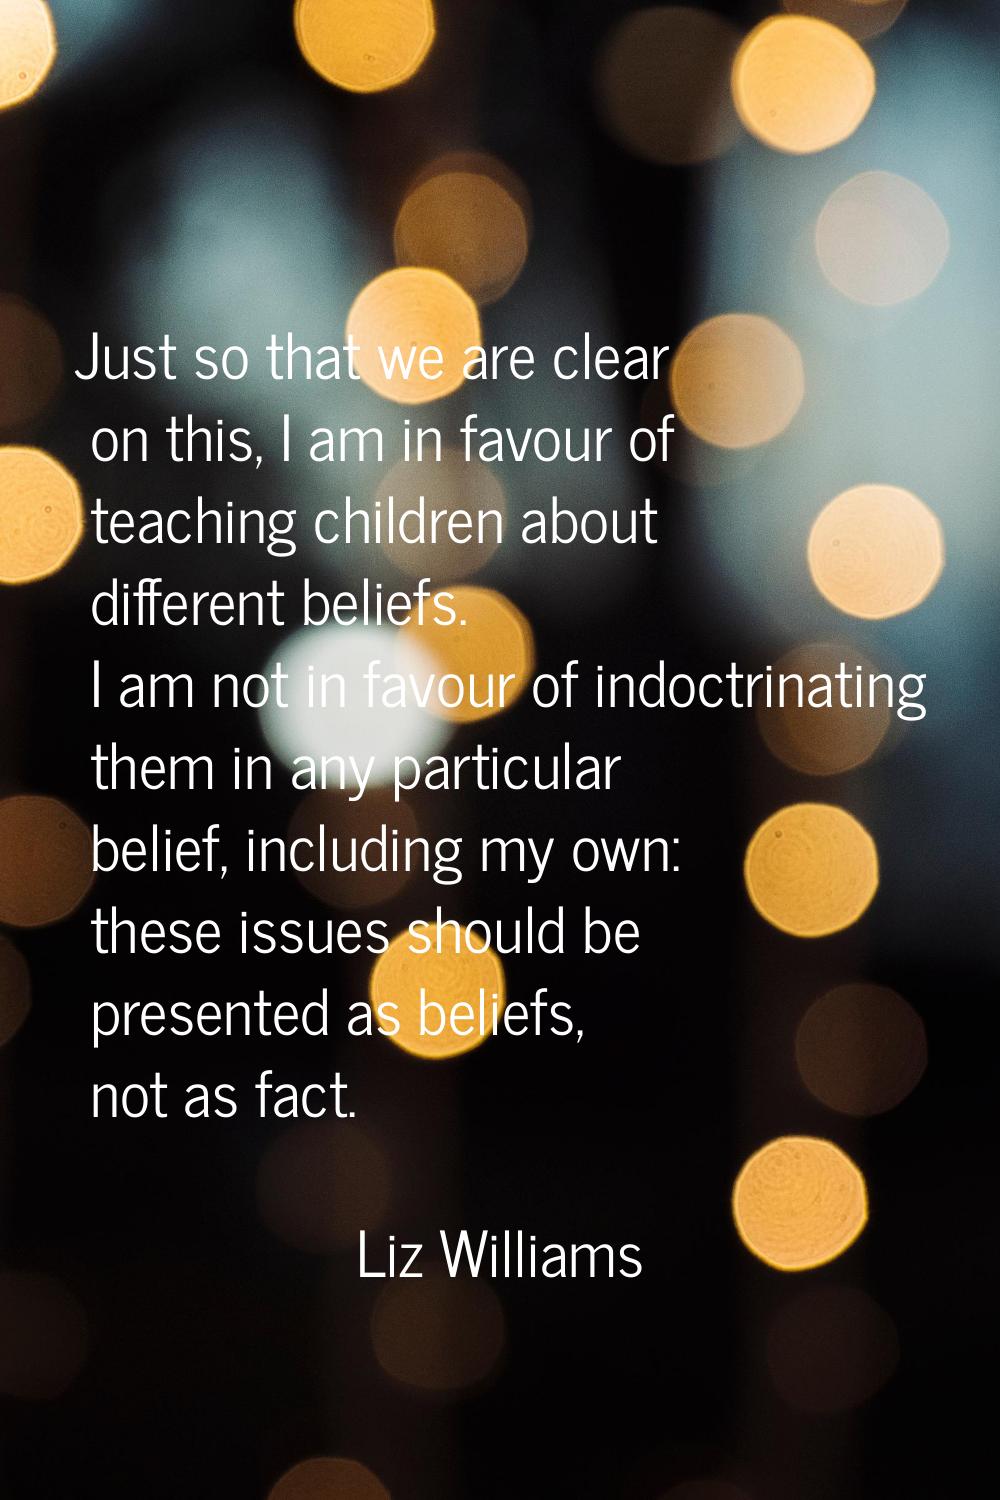 Just so that we are clear on this, I am in favour of teaching children about different beliefs. I a